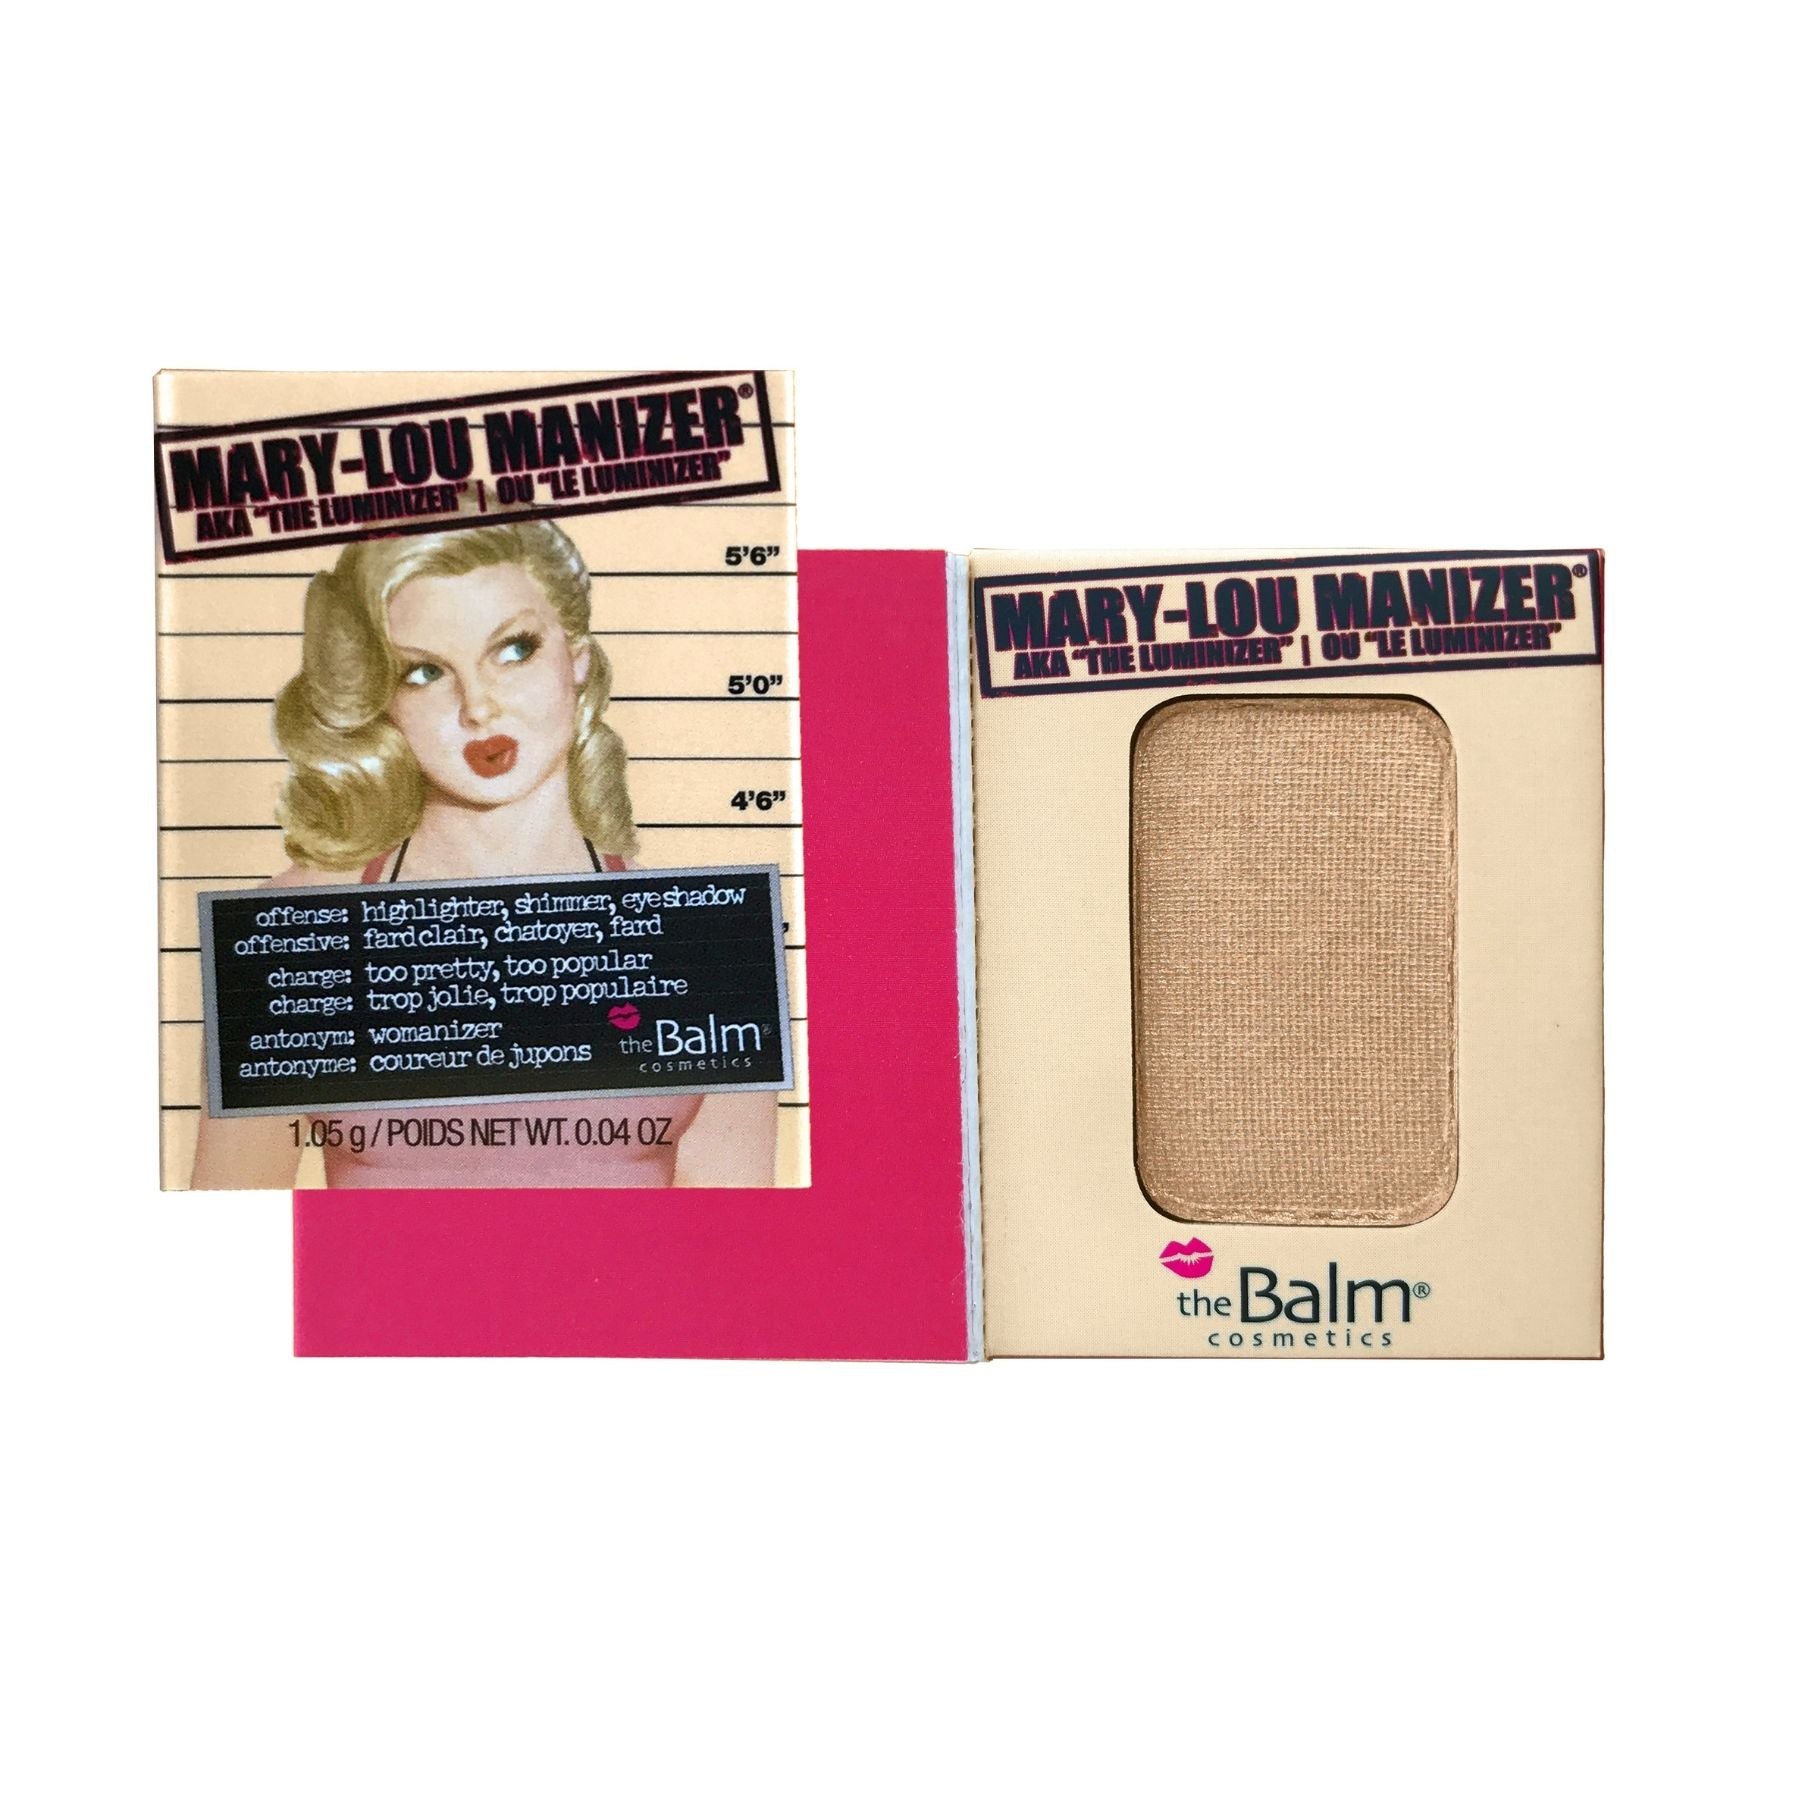 Mini theBalm Lou Manizier Highlighter when you purchase any